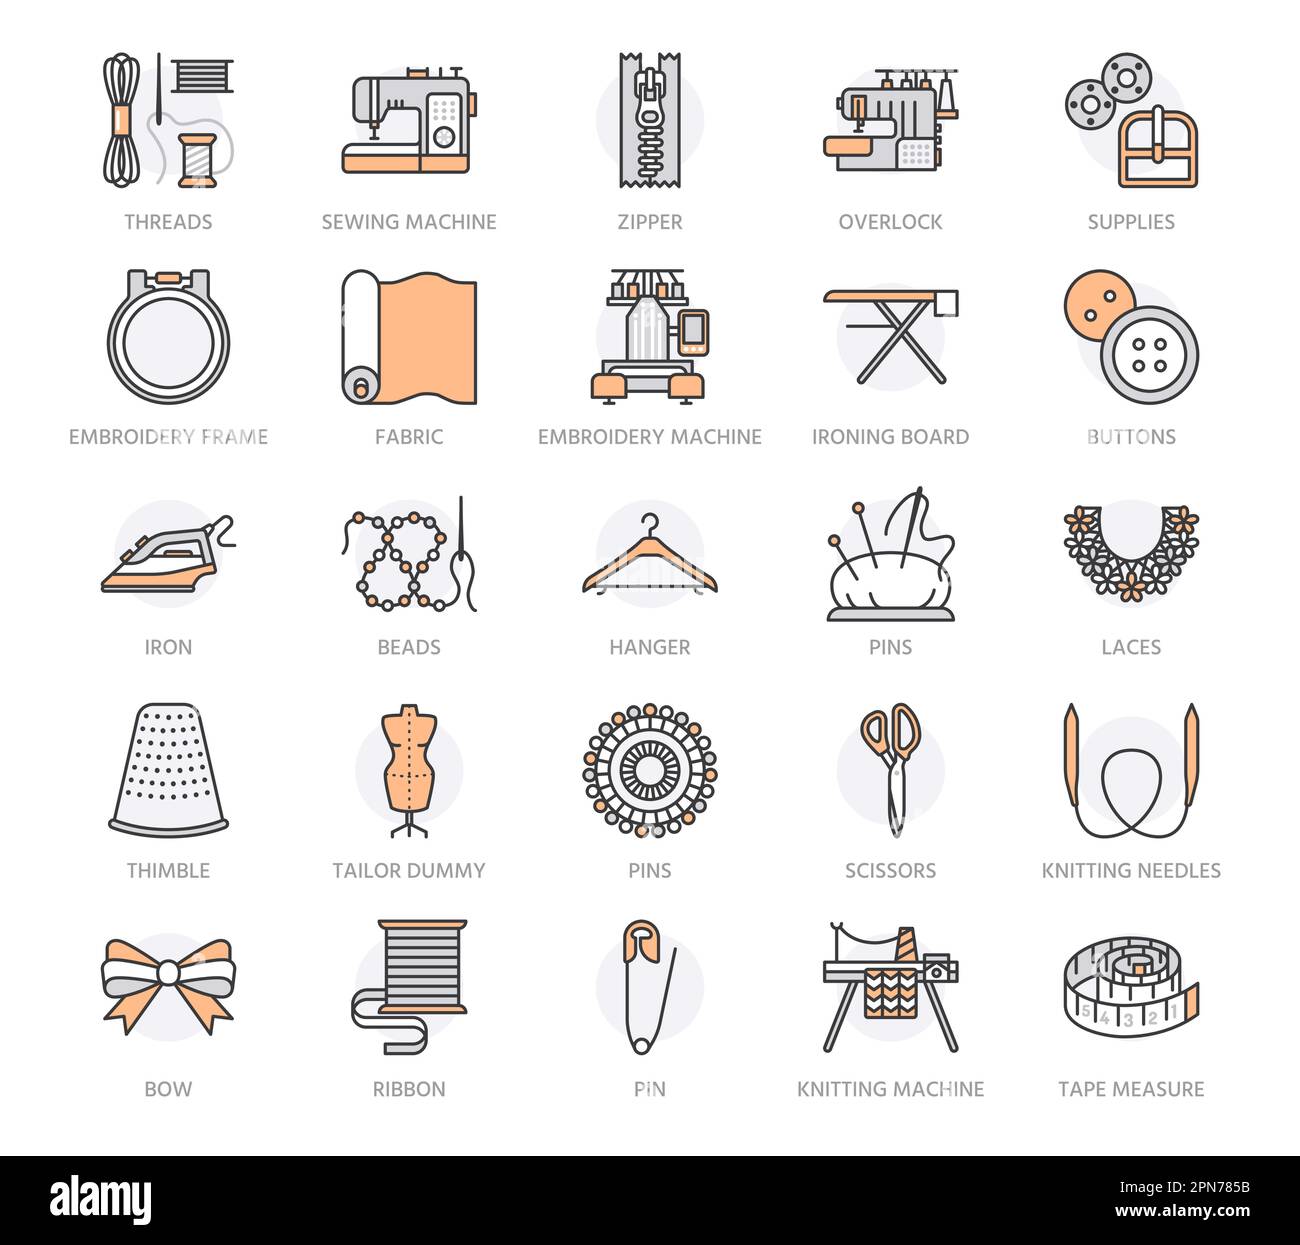 Sewing items: buttons, scissors, measuring tape on sewing pattern Stock  Photo - Alamy